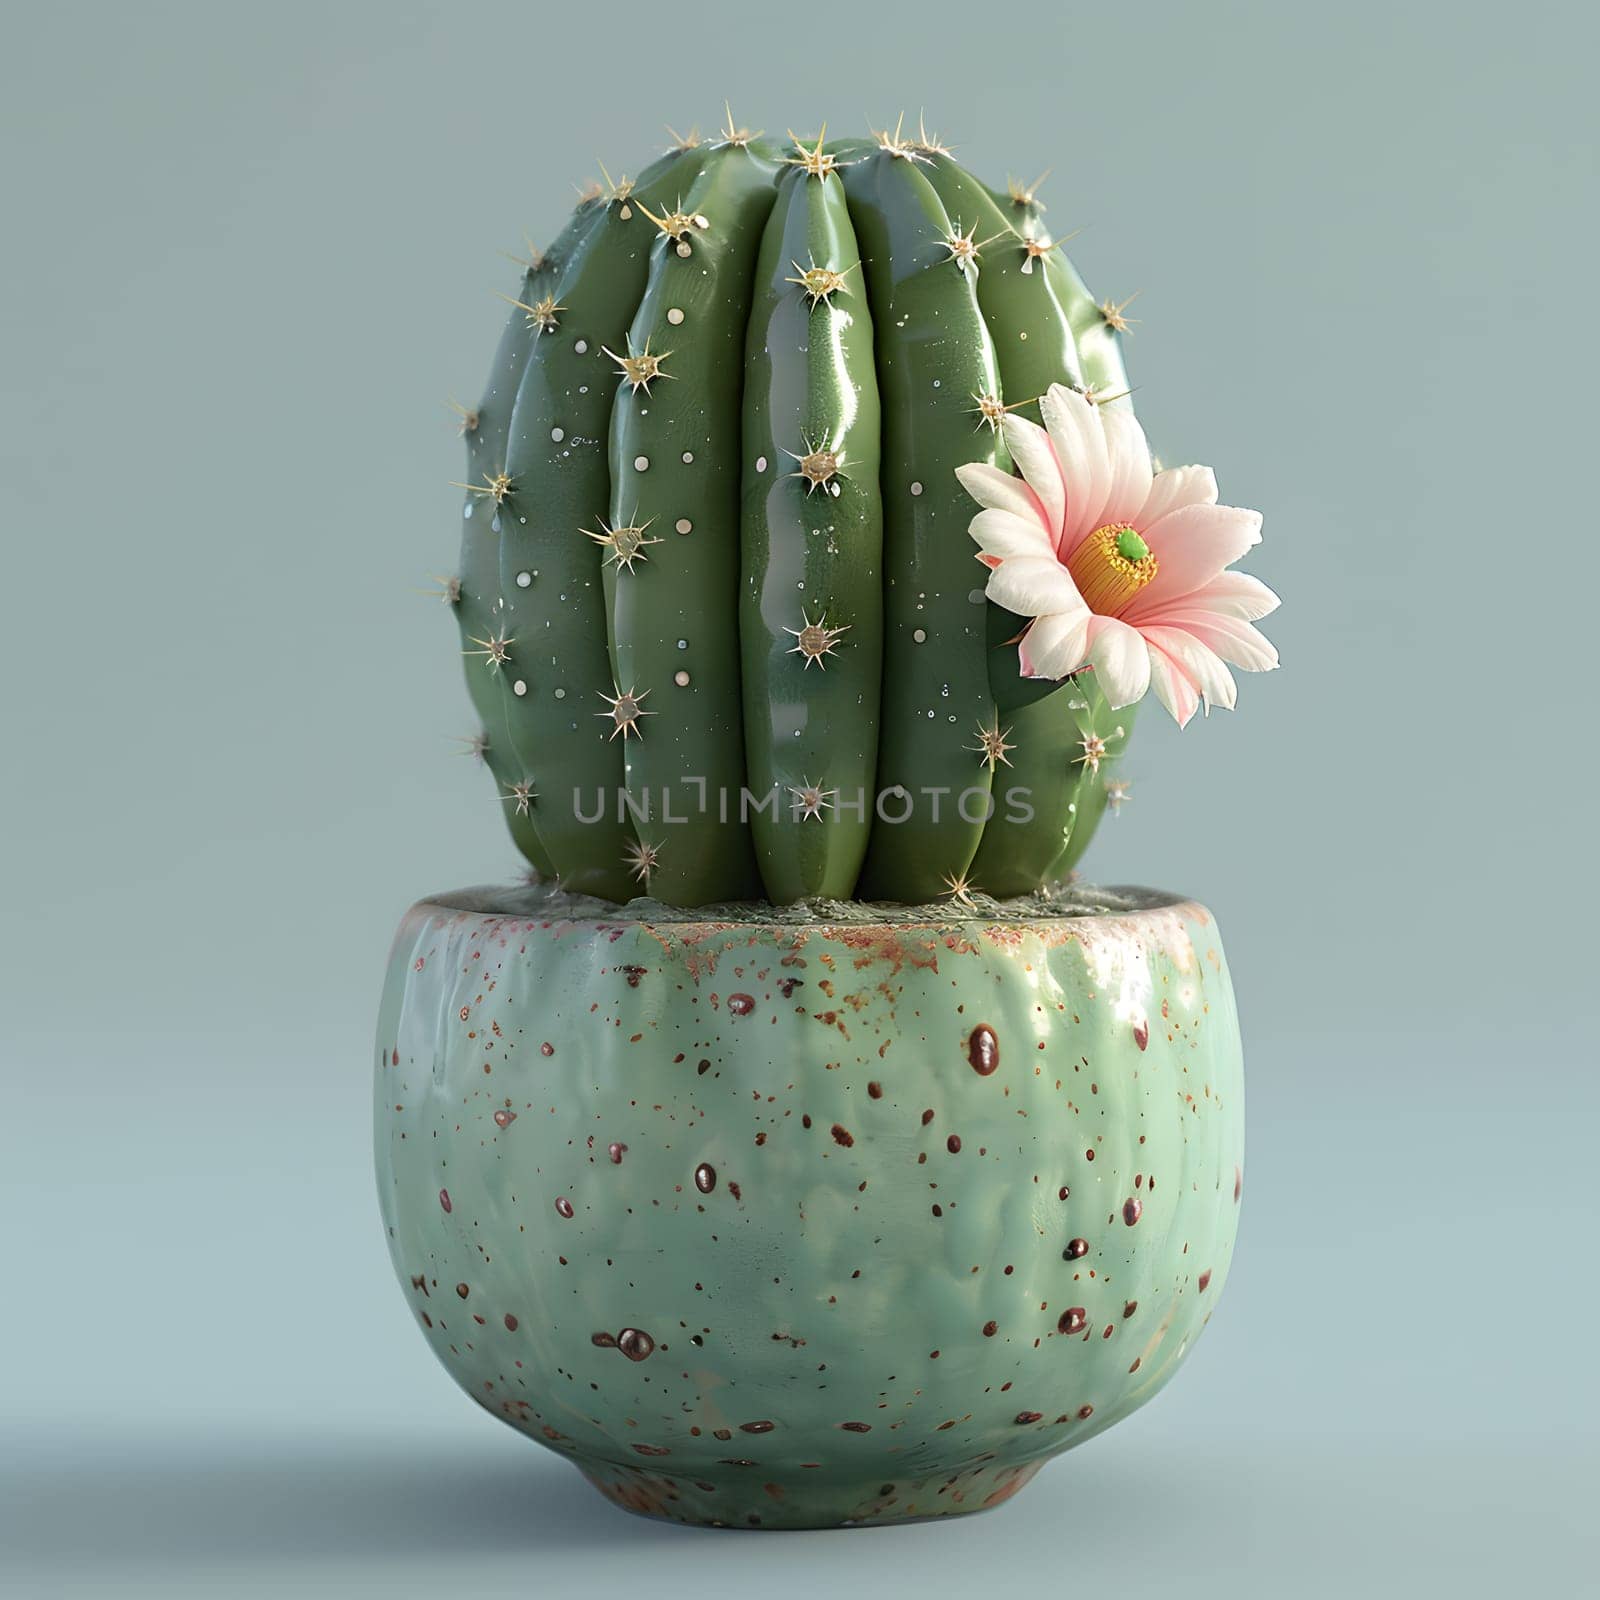 A terrestrial plant, cactus, is creatively displayed in a green flowerpot with a pink flower on top. This natural material houseplant adds an artistic touch to any landscape